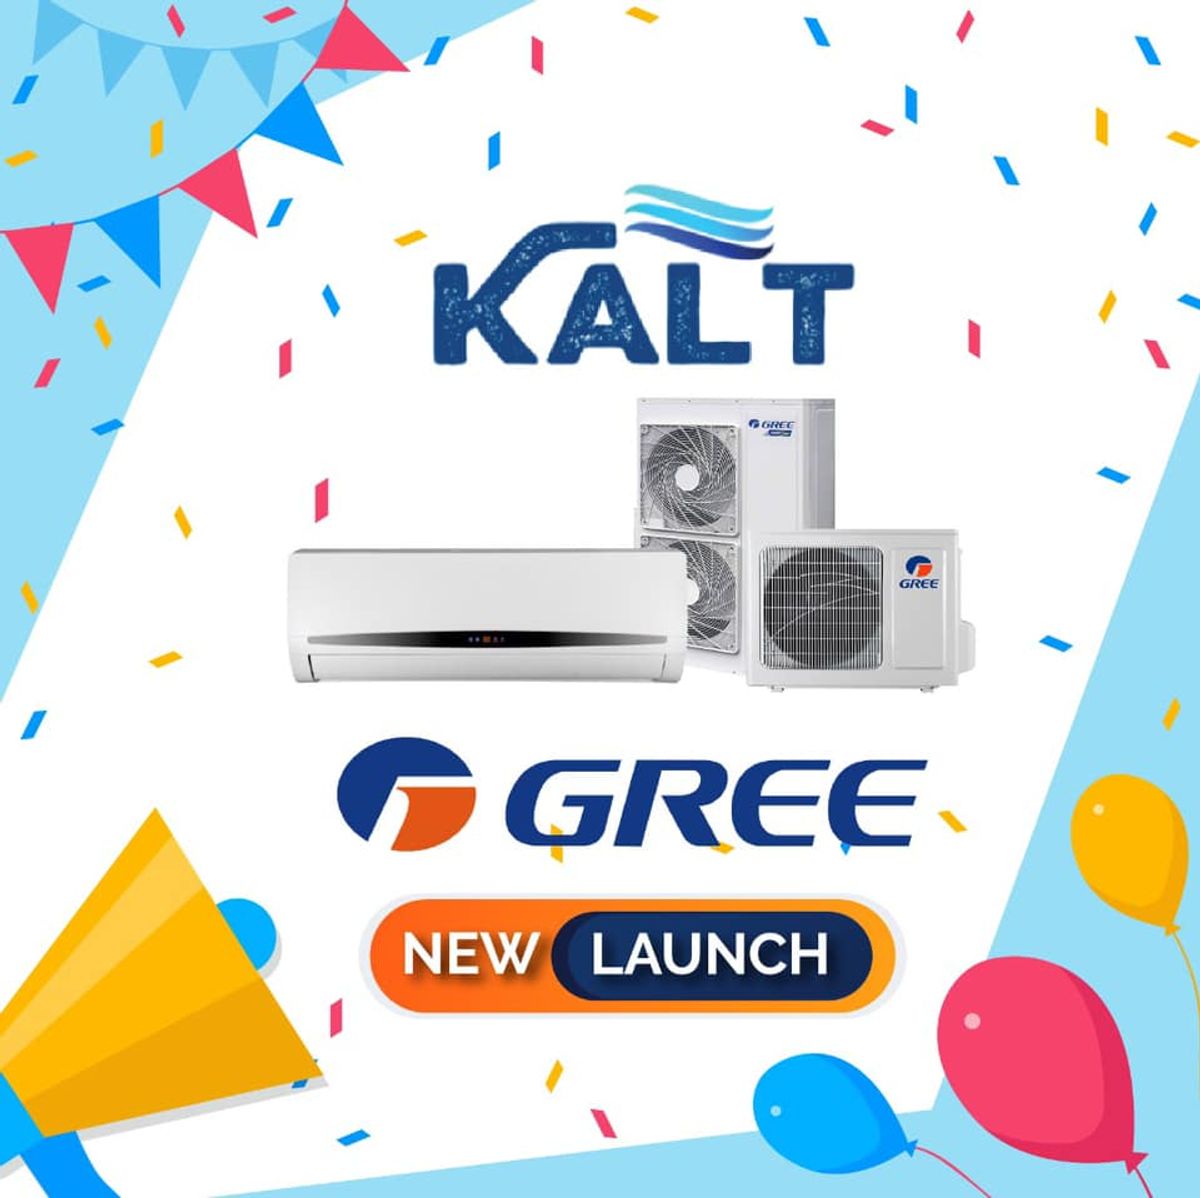 New Product Launch - Gree